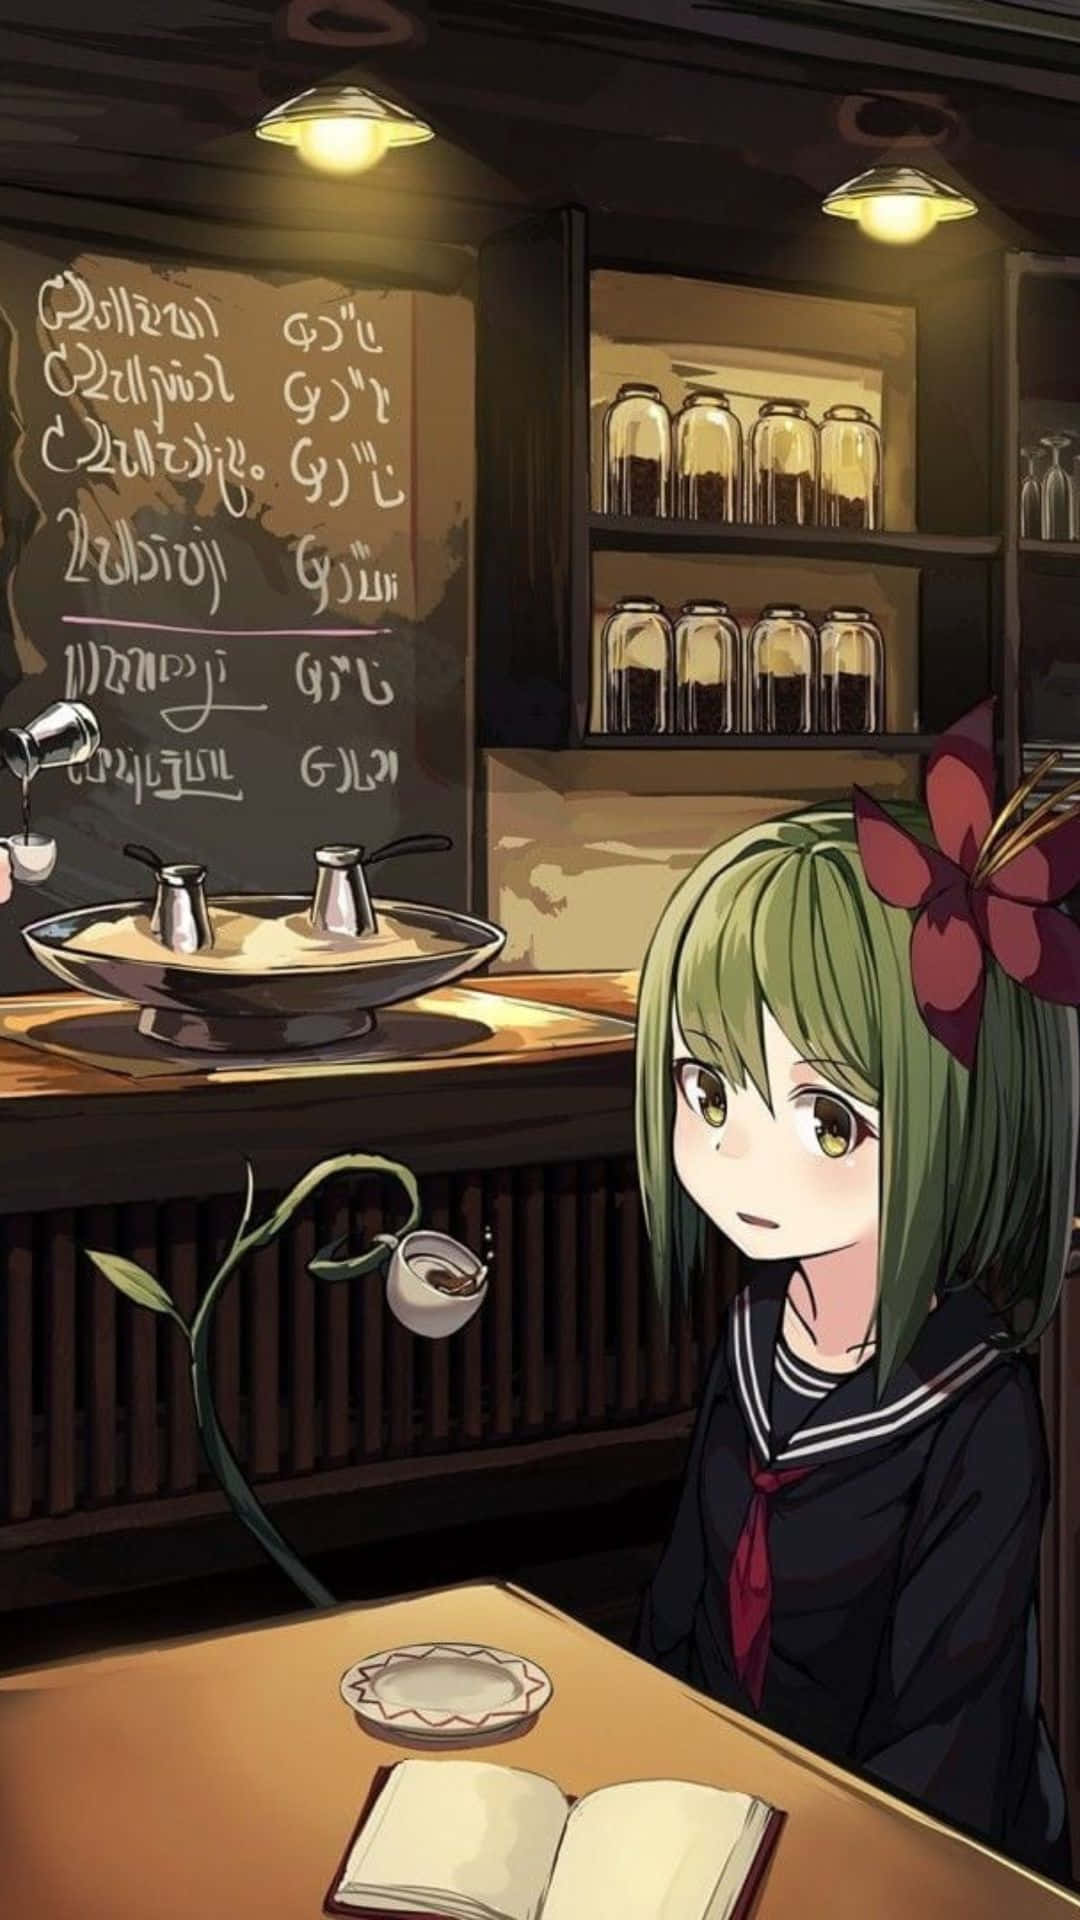 Download Anime Cafe Background 1080 X 1920 